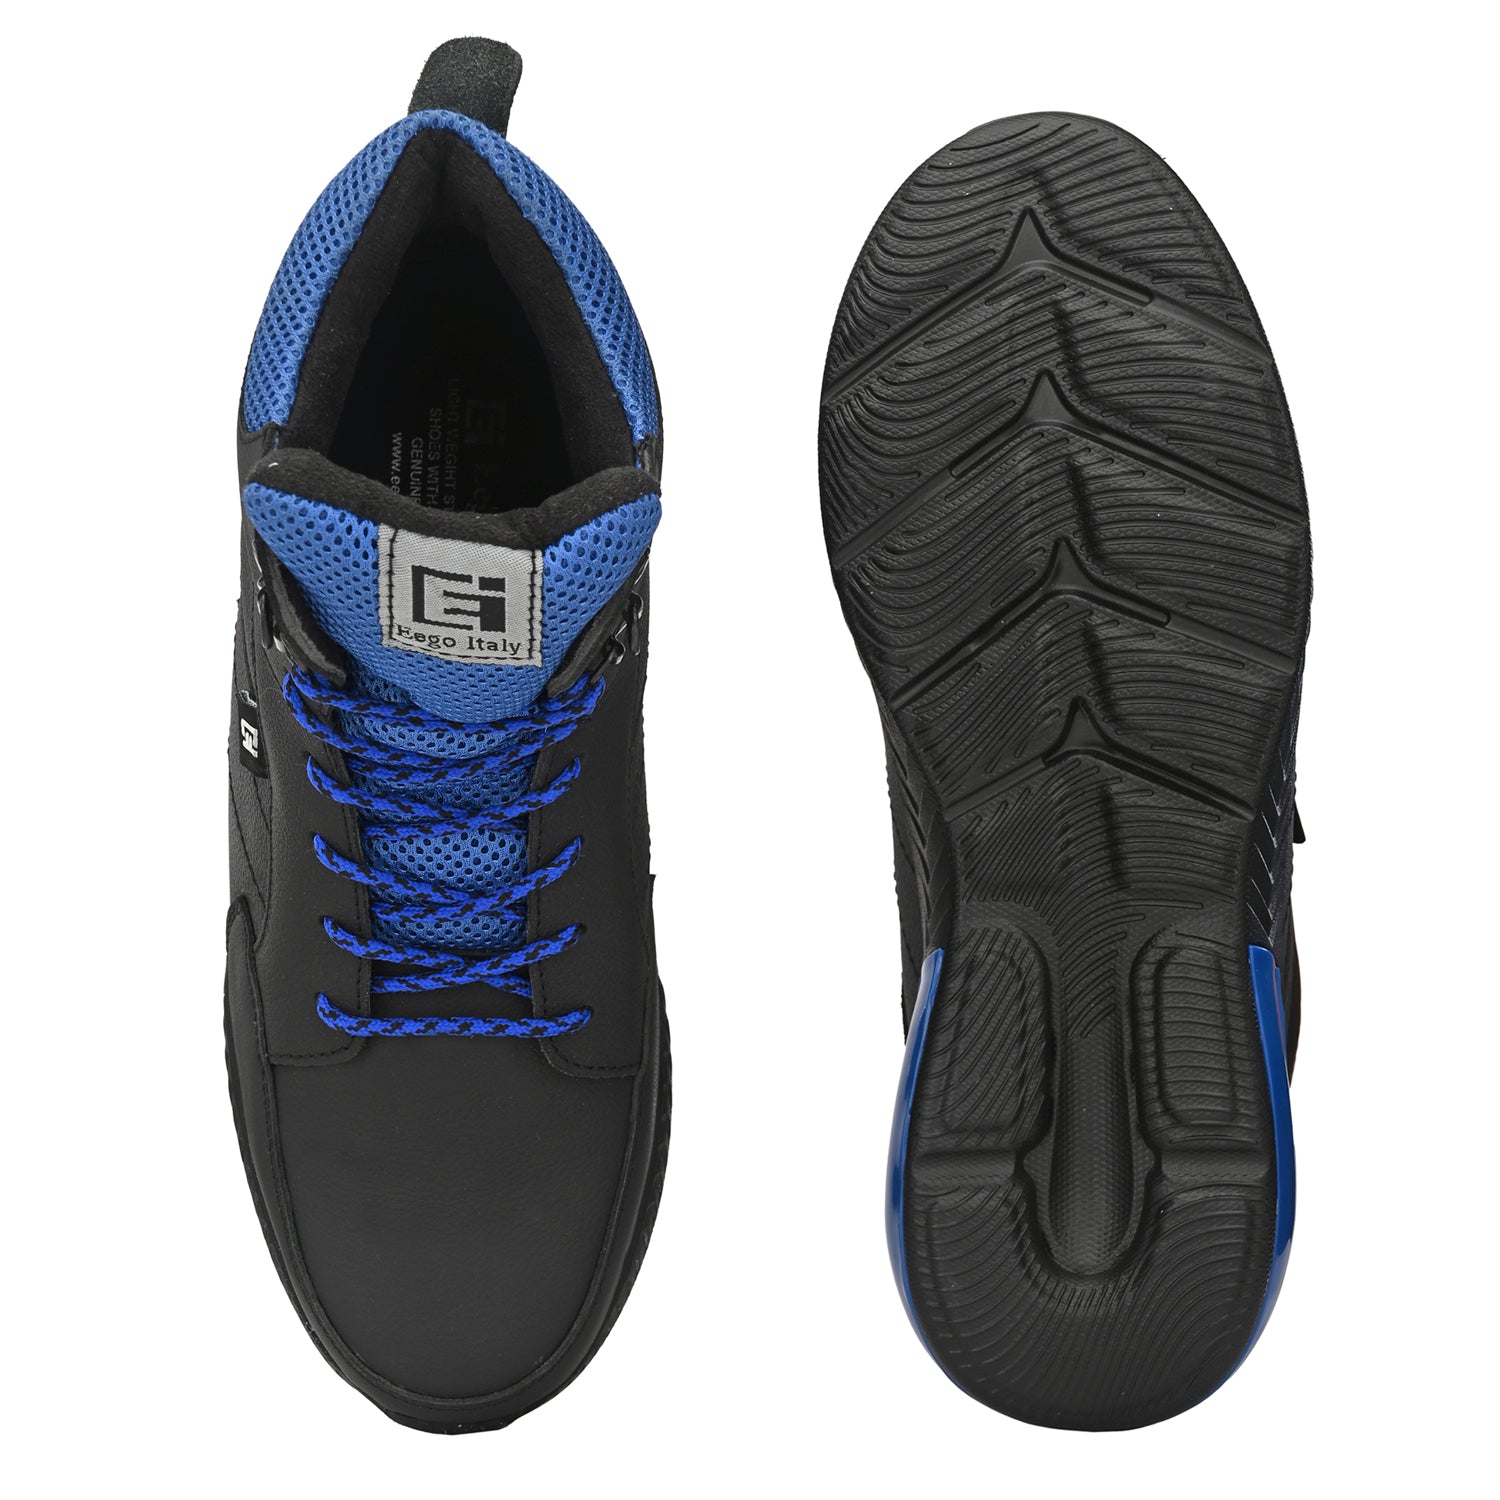 Buy Hego Shoes Men's Synthetic Running Shoes at Amazon.in